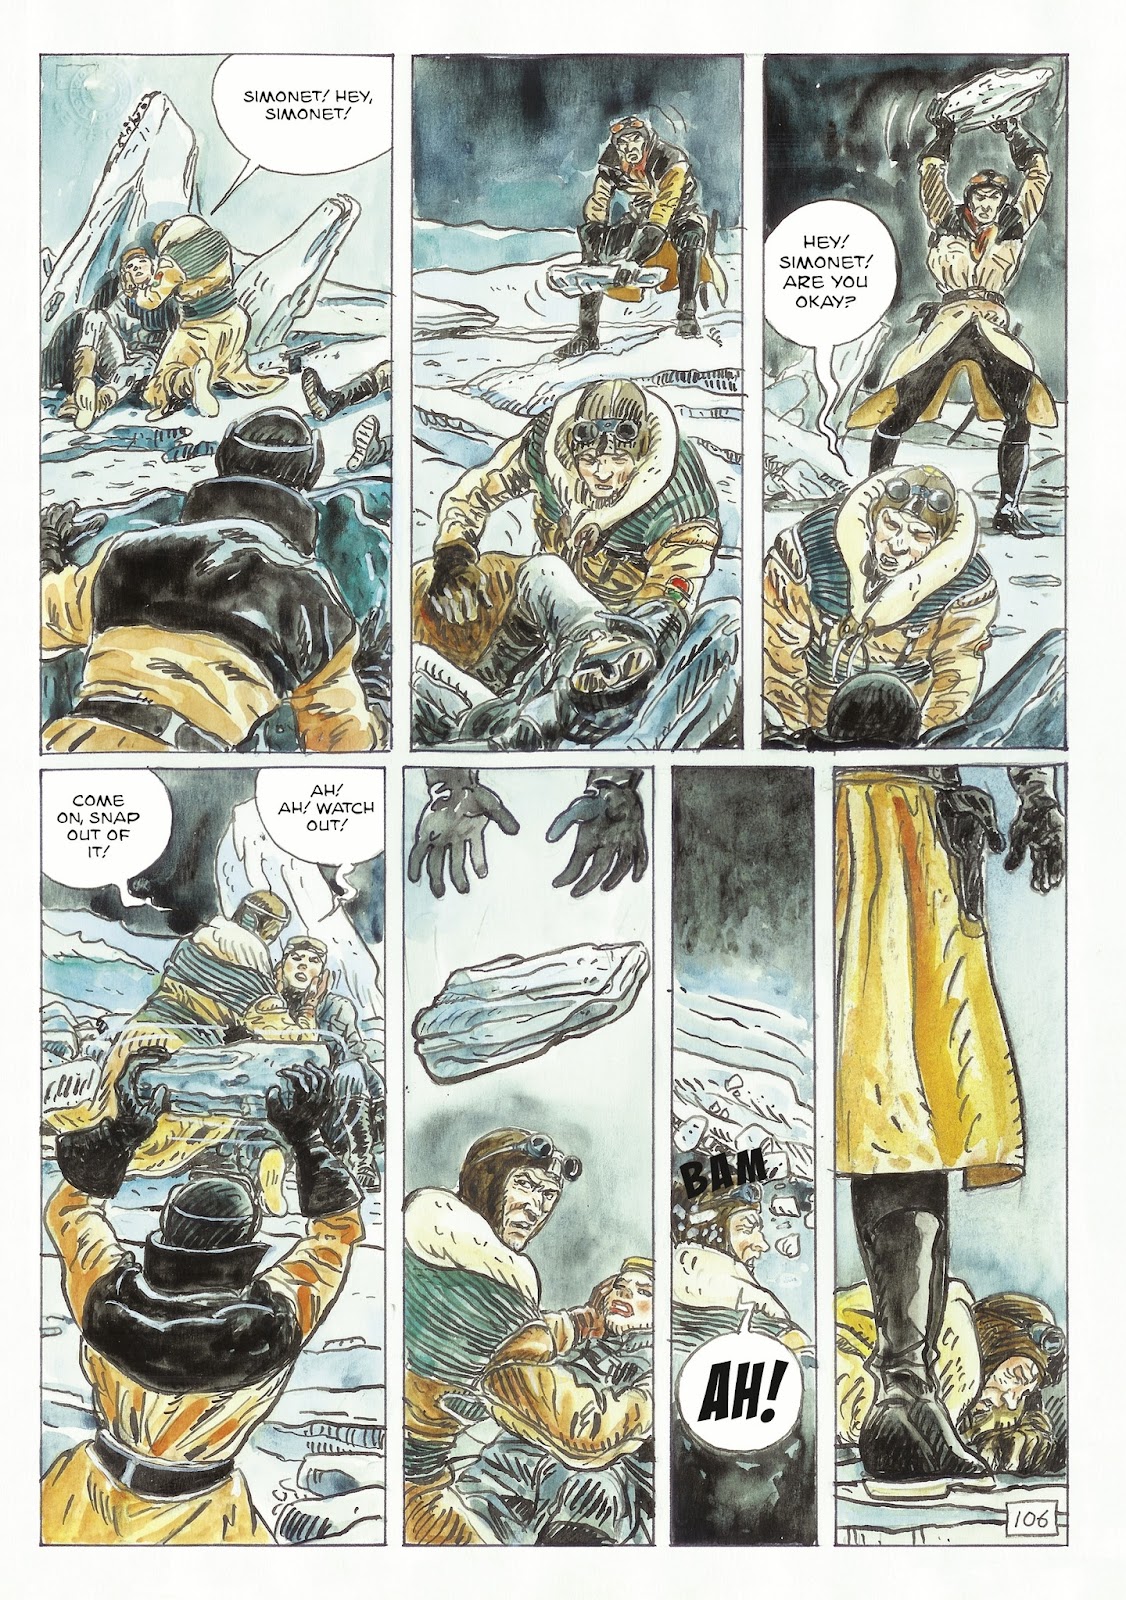 The Man With the Bear issue 2 - Page 52